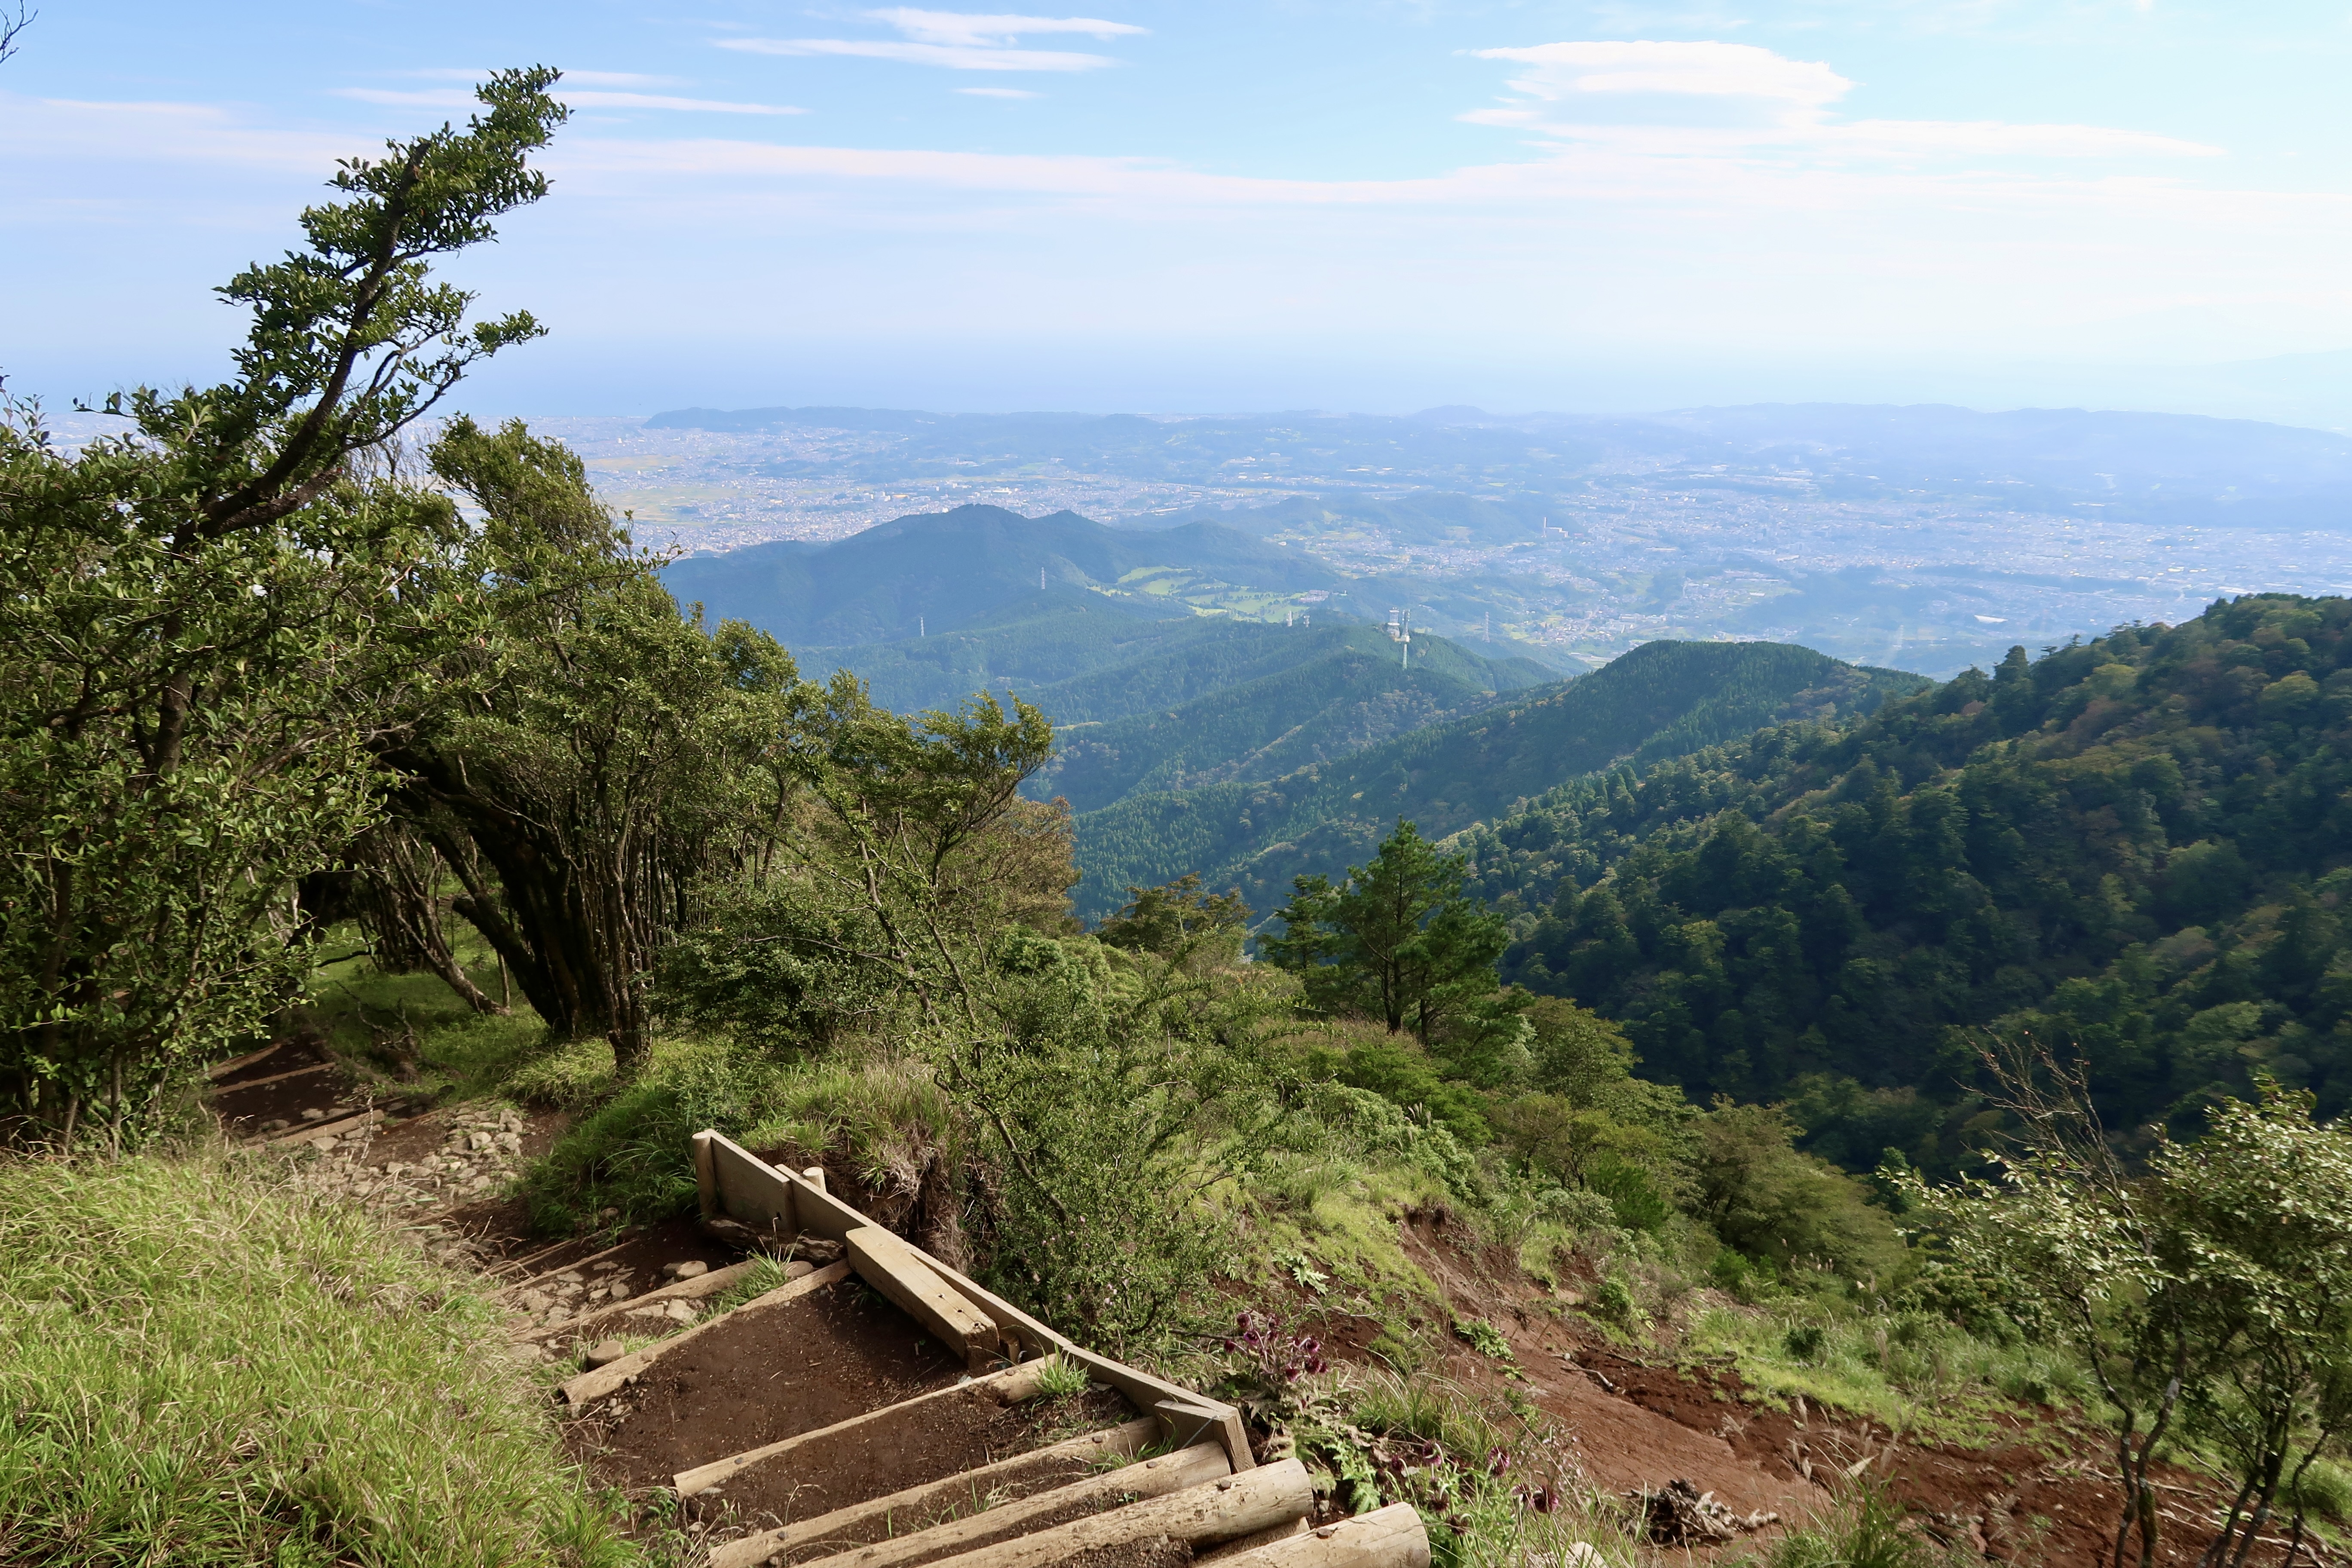 Vistas from Mt. Oyama's trails